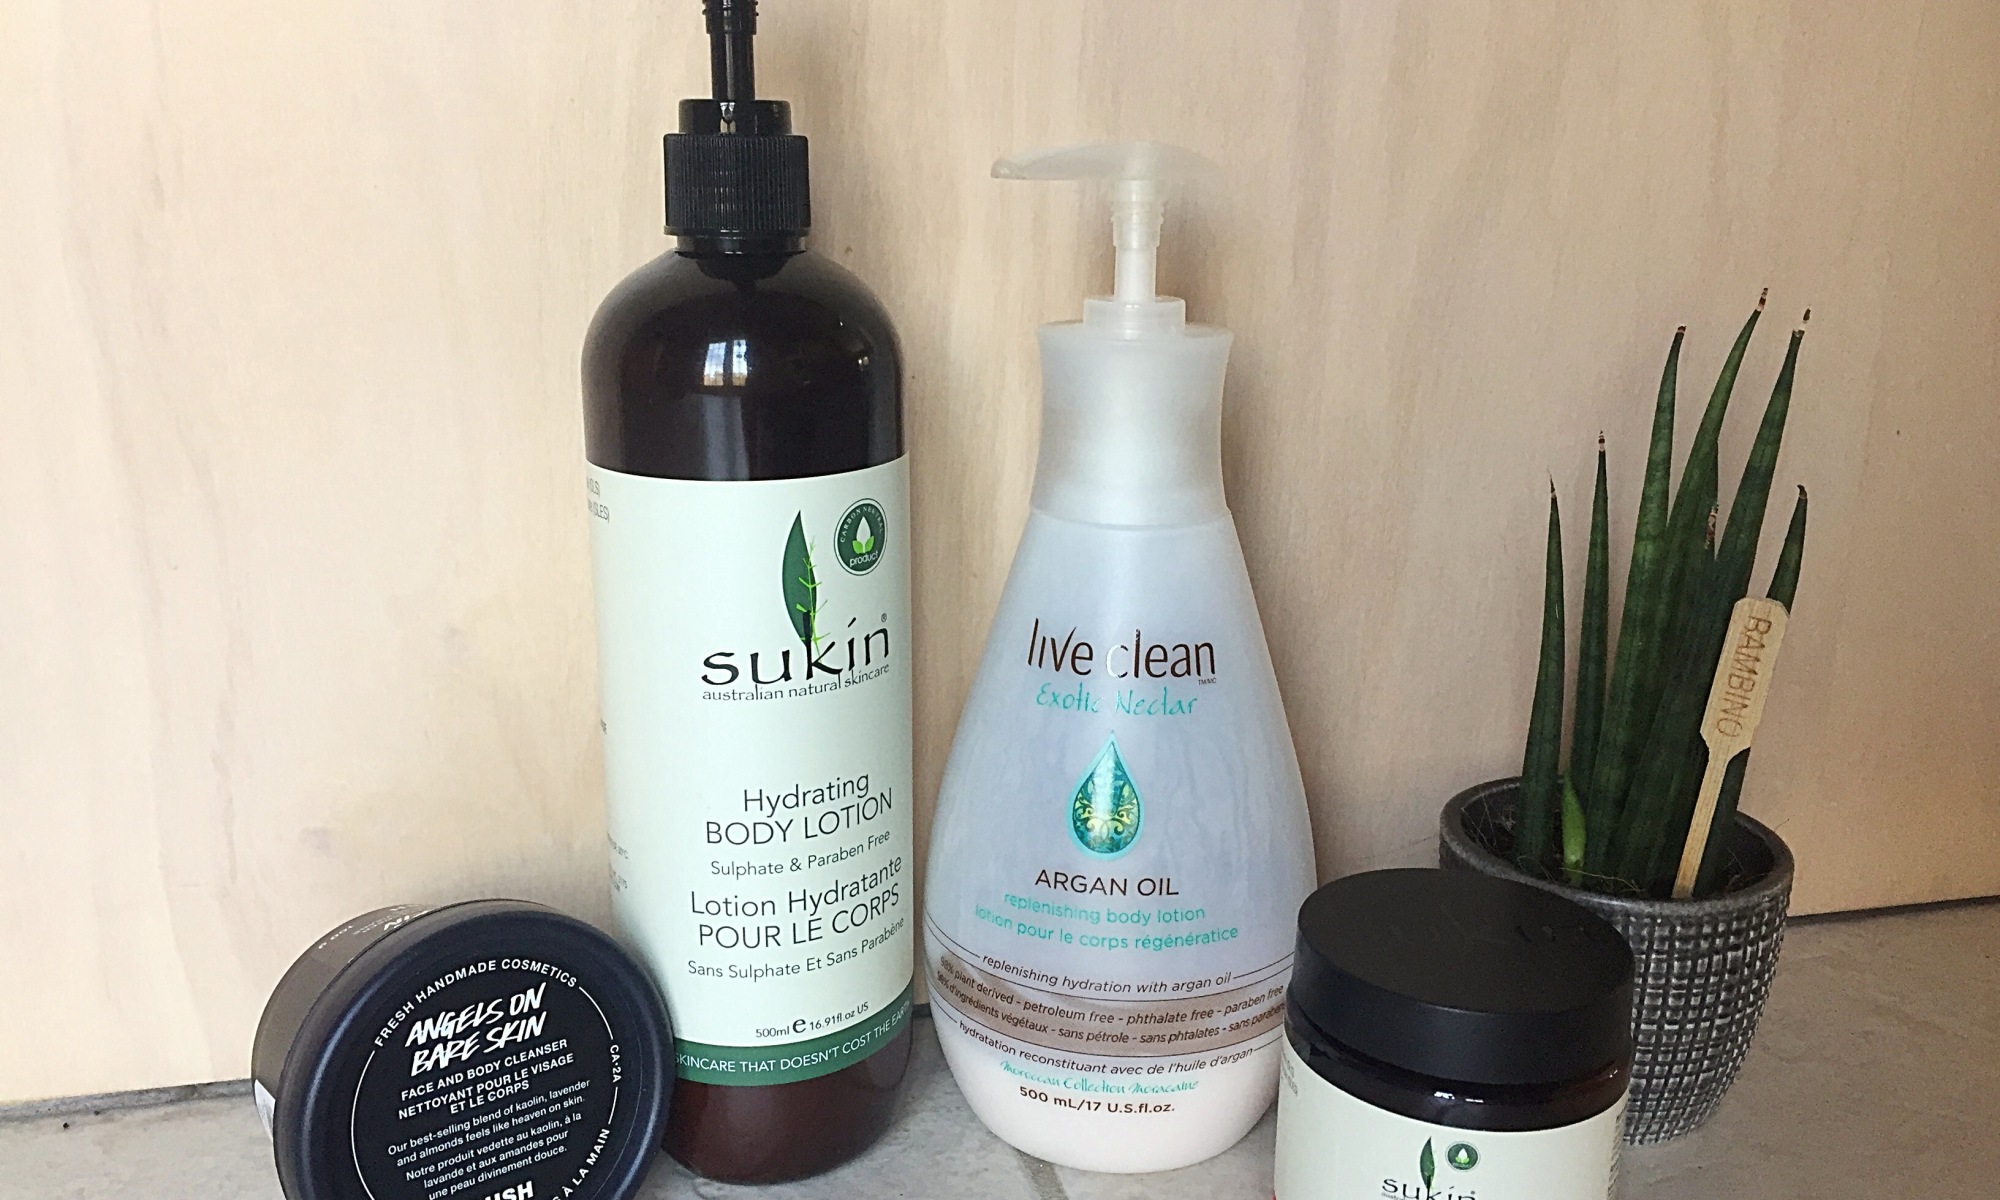 An image of a selection of non-toxic body and face care products, including brands such as Sukin, Live Clean, and Lush.